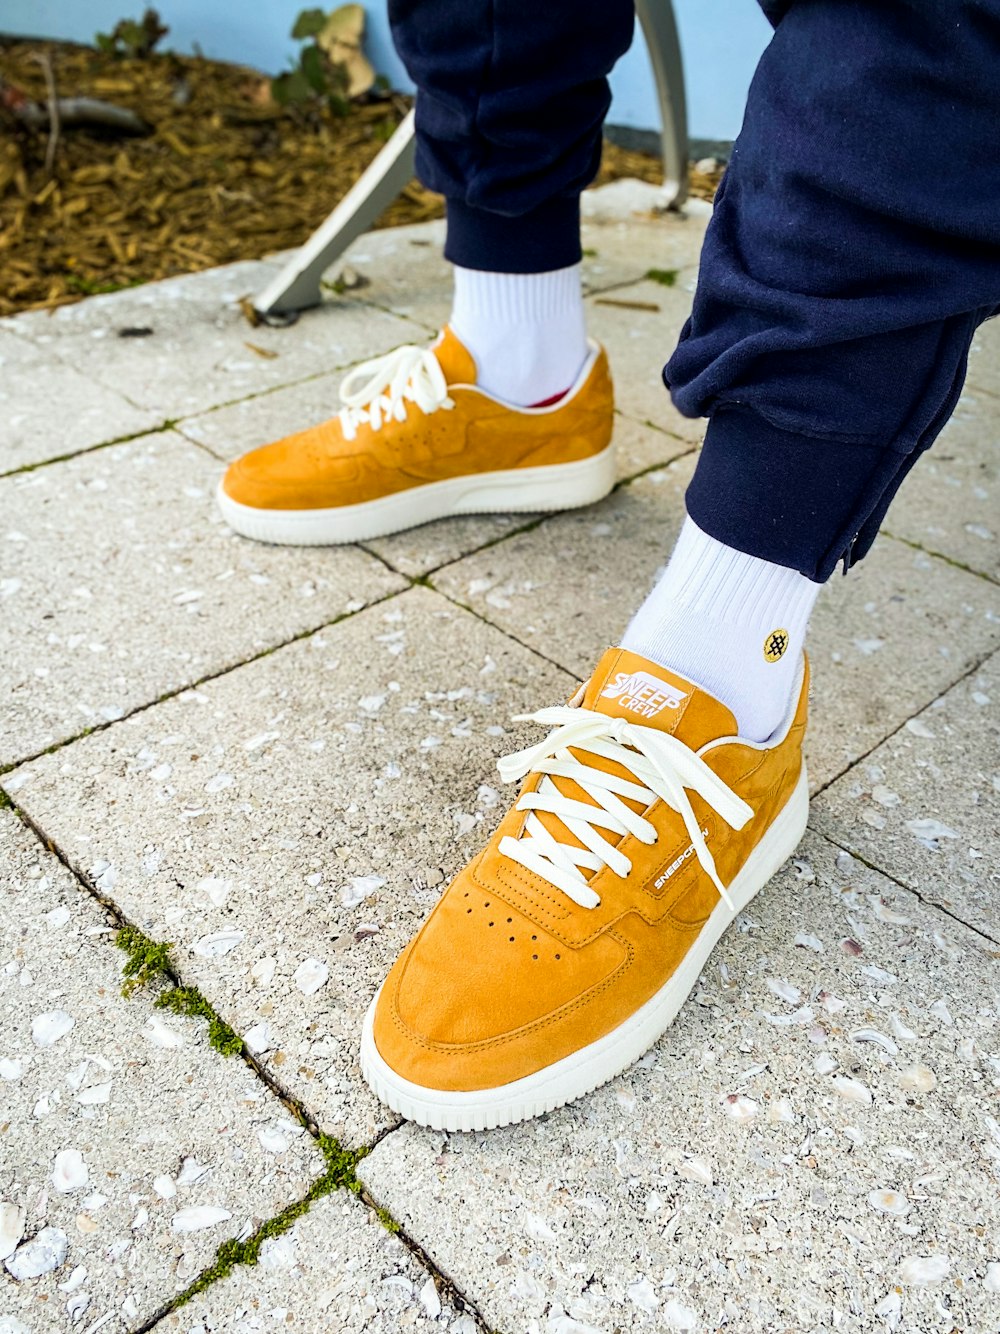 A person's feet in orange and white shoes photo – Free Shoe Image on  Unsplash